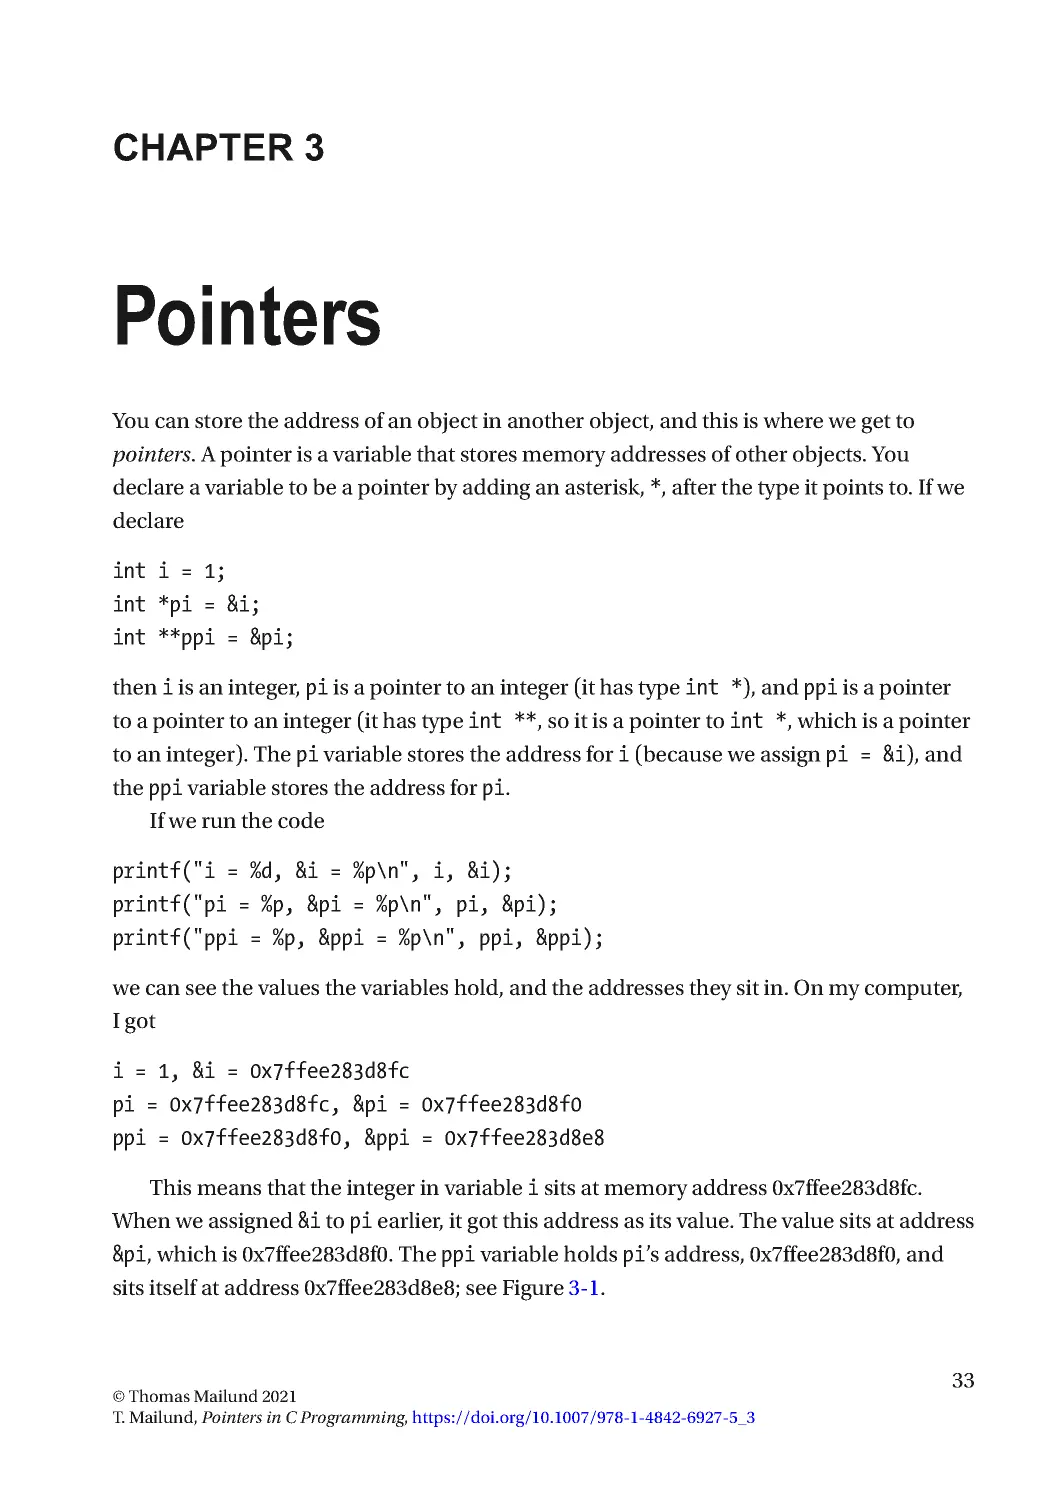 Chapter 3: Pointers